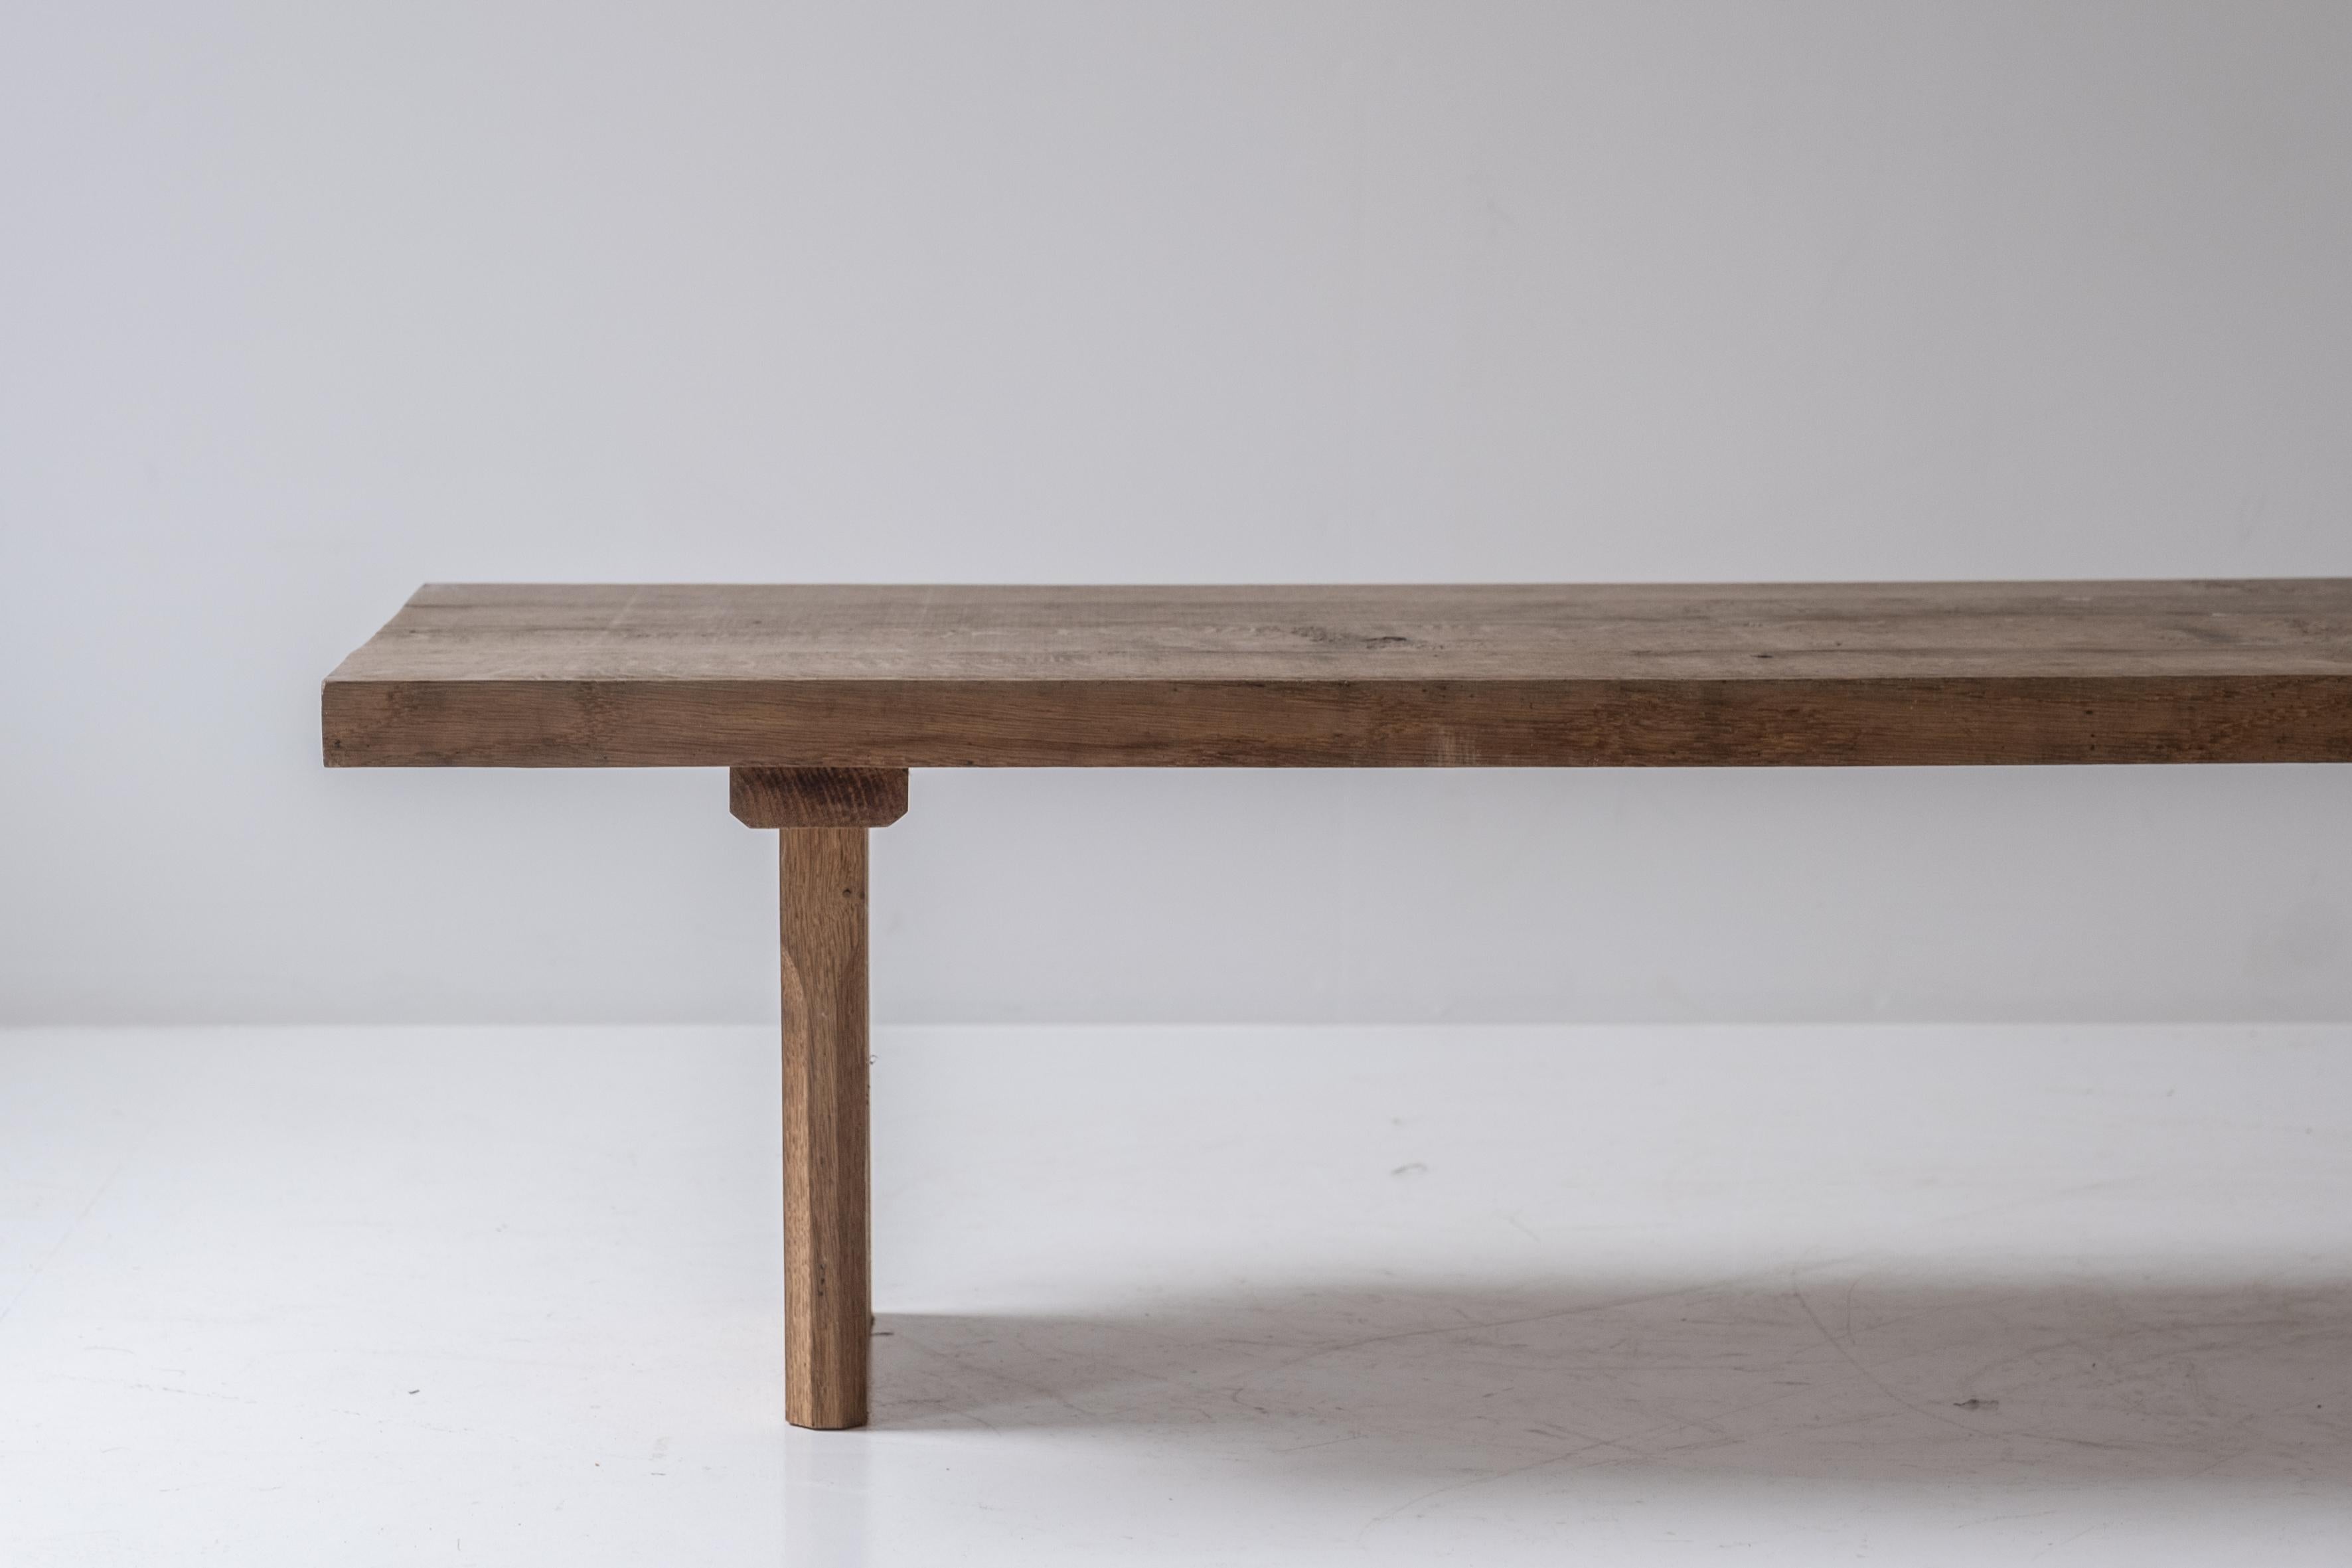 Low rustic coffee table from France, designed and handmade in the 1950s. 3